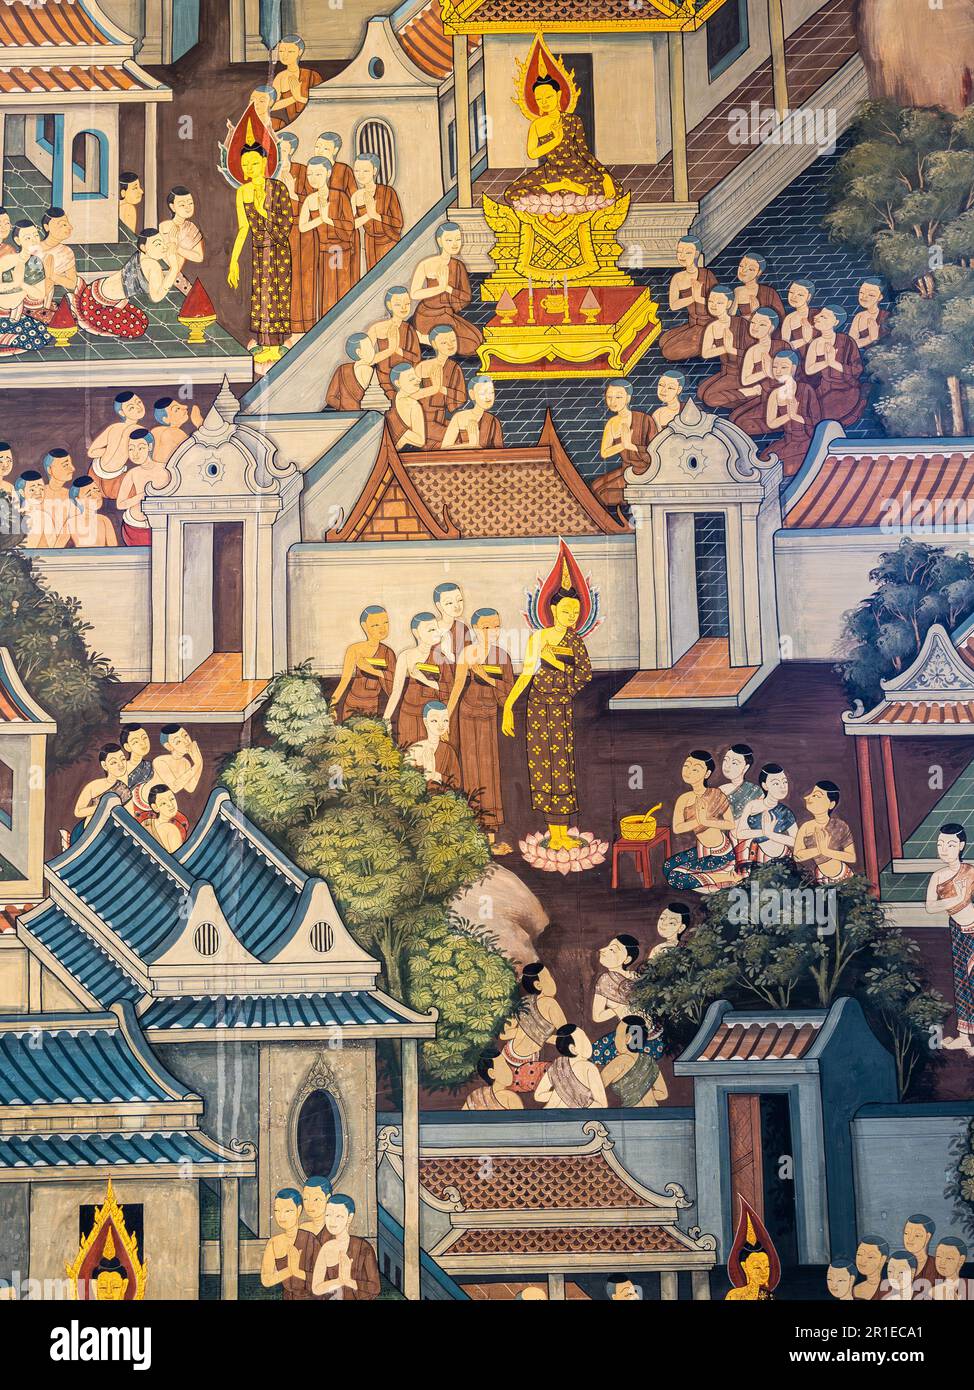 A wall painting in the Wat Pho temple in Bangkok, Thailand, with details of a ceremony. Stock Photo